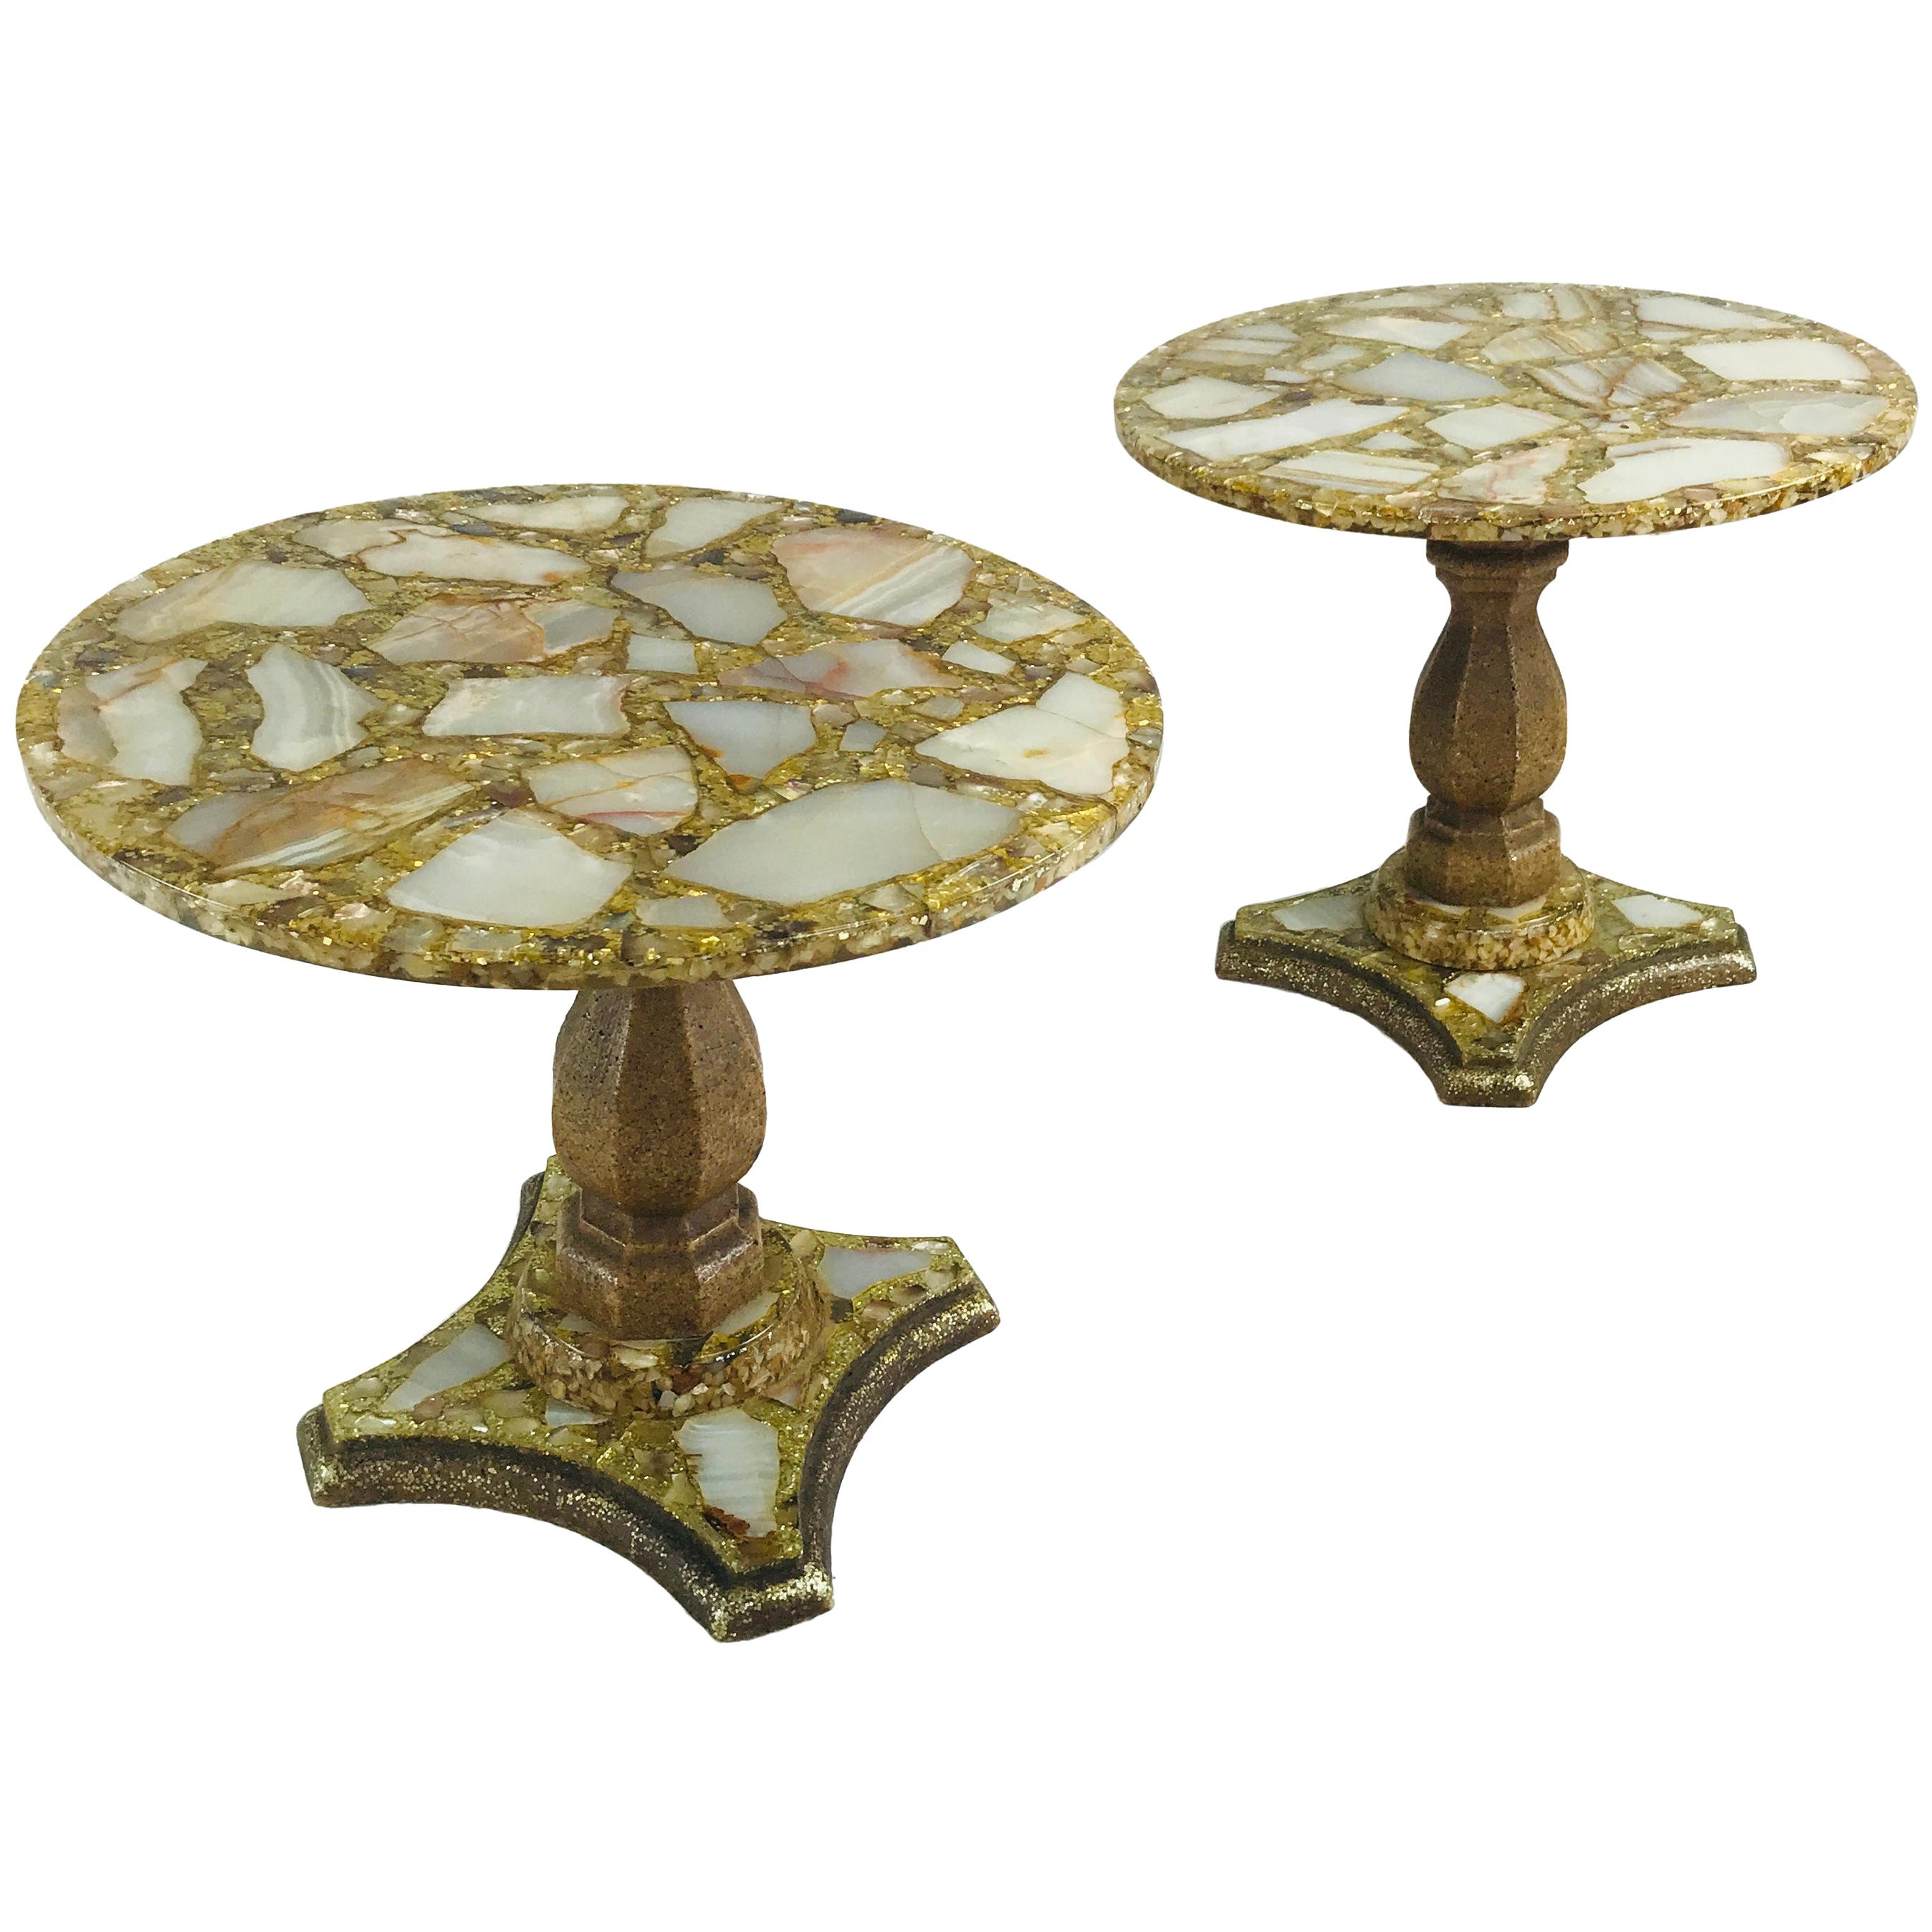 Pair of Onyx Abalone Shell Gold Glitter Cocktail Tables by Arturo Pani